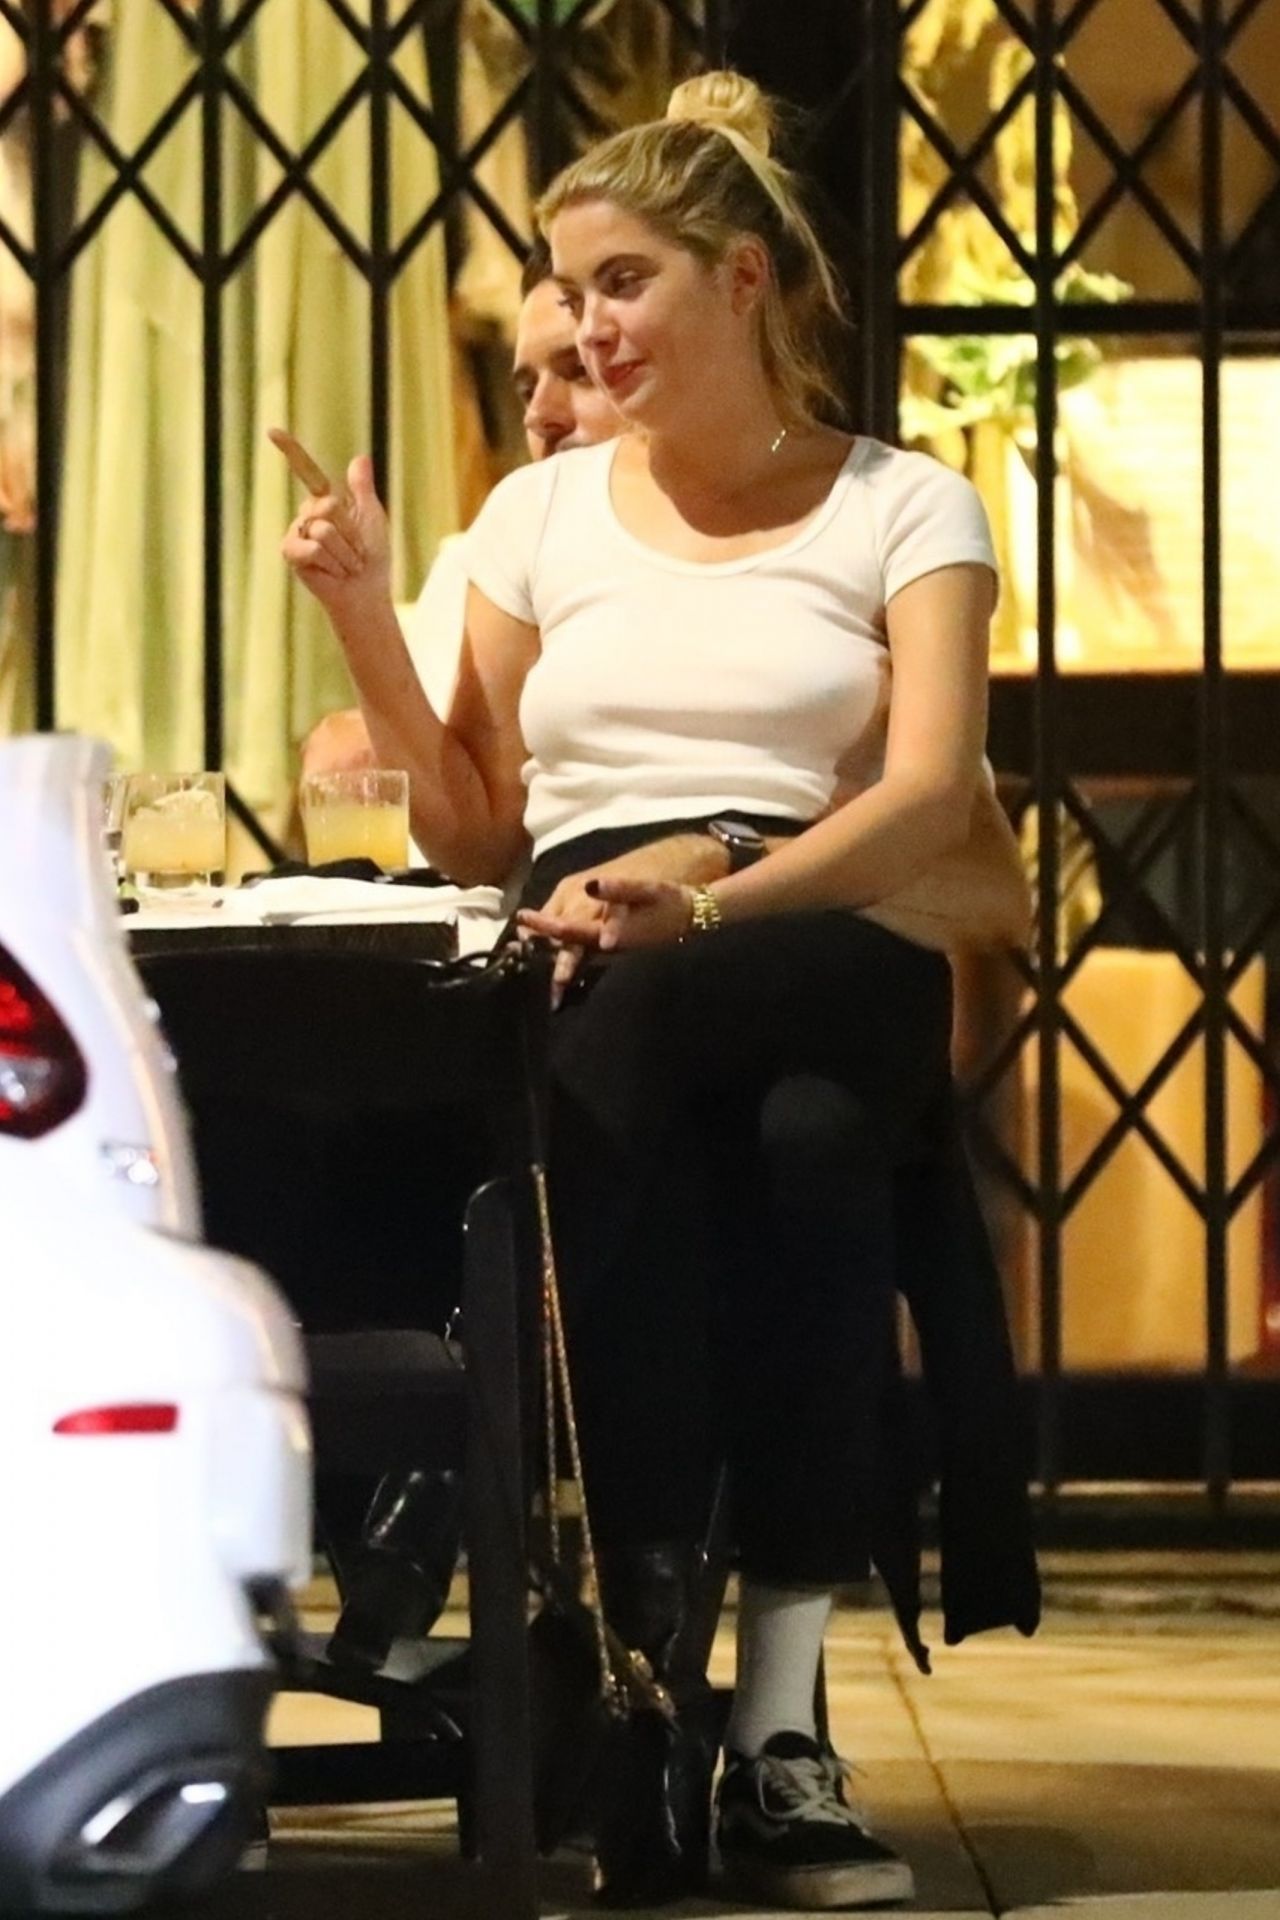 ashley-benson-out-to-dinner-with-boyfriend-g-eazy-in-la-08-19-2020-6.jpg